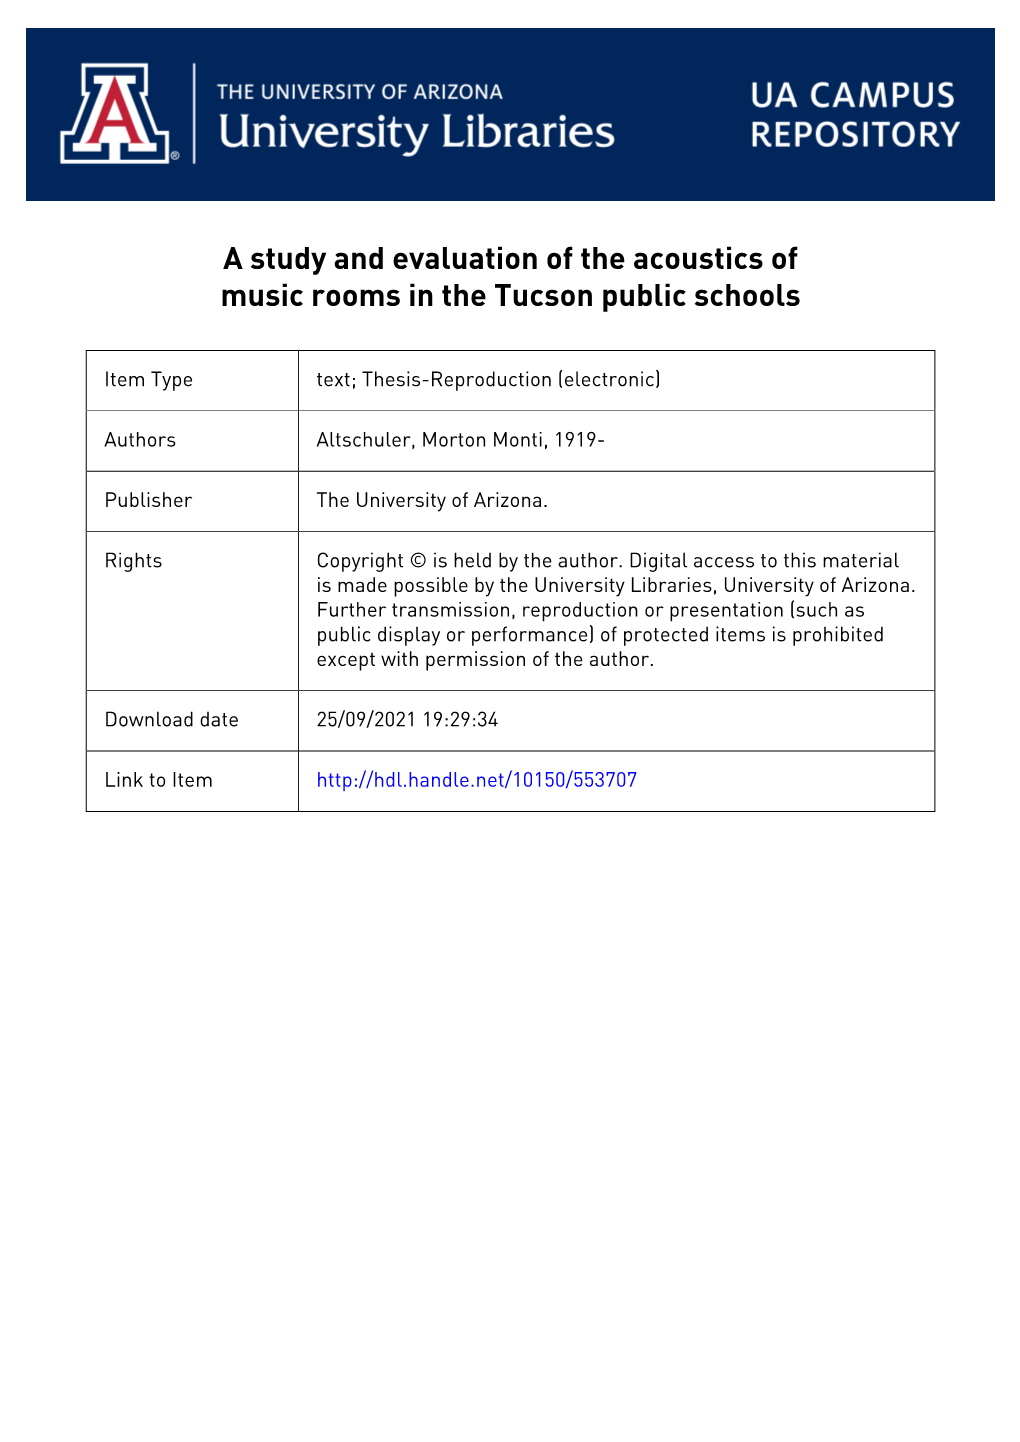 A Study Am) Evaluation of the Acoustics of Music Rooms in the Tucson Public Schools